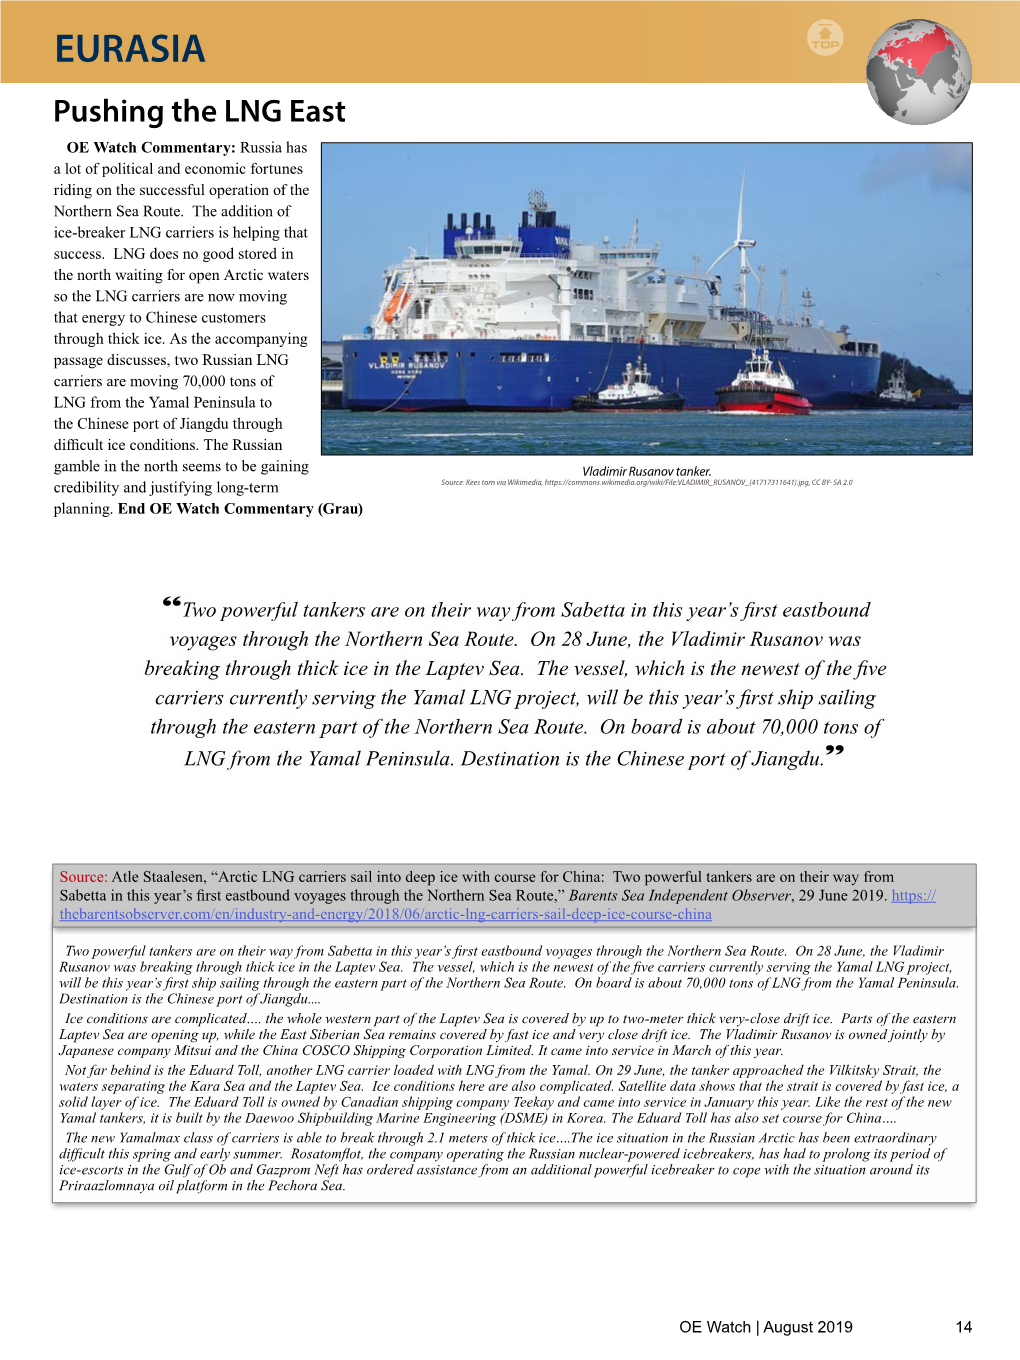 EURASIA Pushing the LNG East OE Watch Commentary: Russia Has a Lot of Political and Economic Fortunes Riding on the Successful Operation of the Northern Sea Route